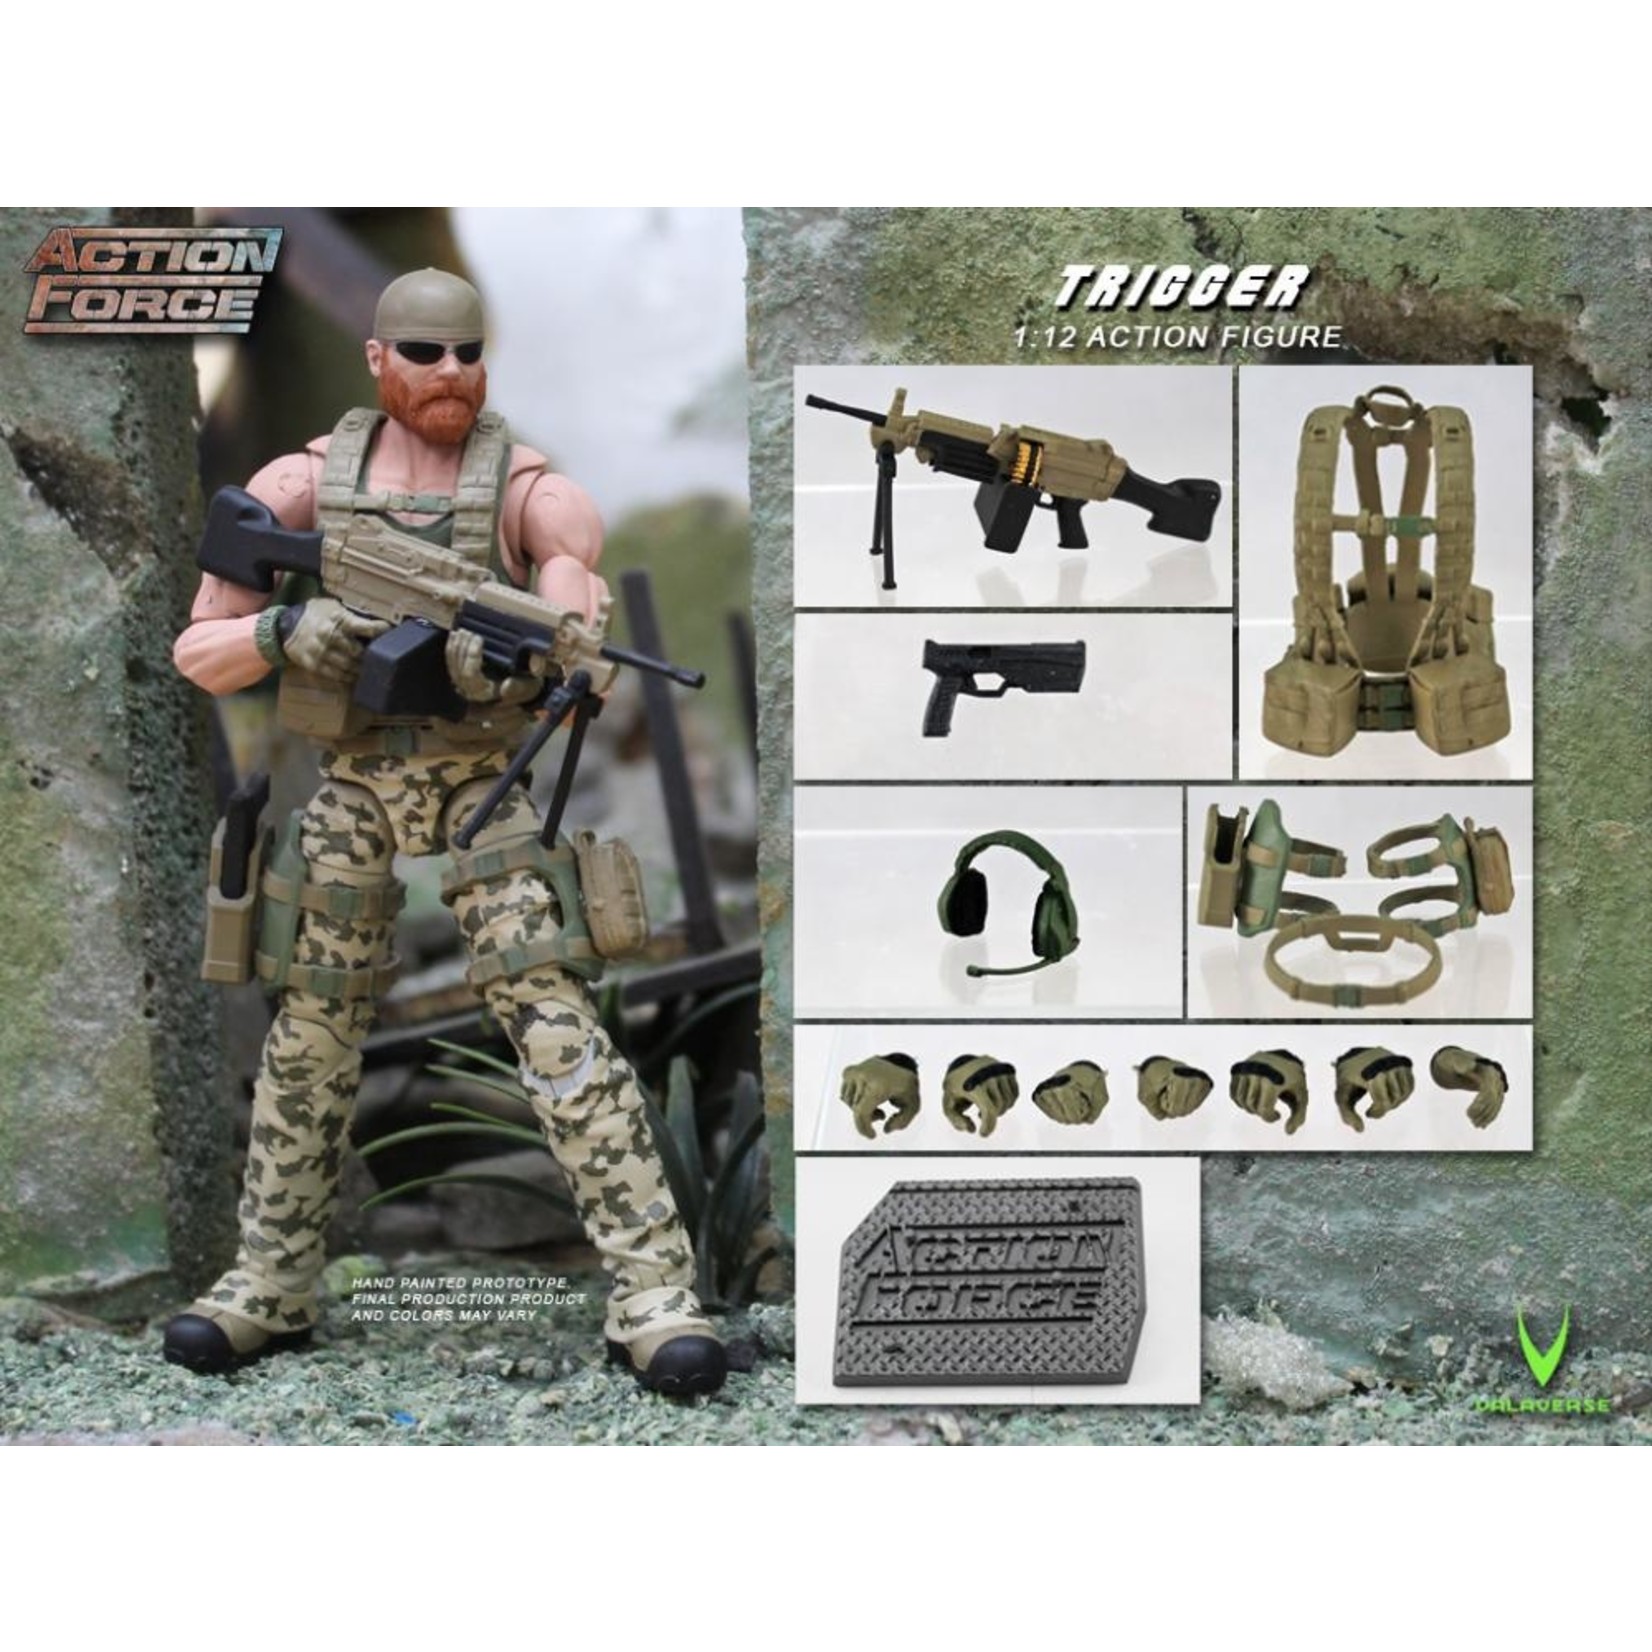 Valaverse Valaverse Action Force Trigger 1/12 Scale Action Figure